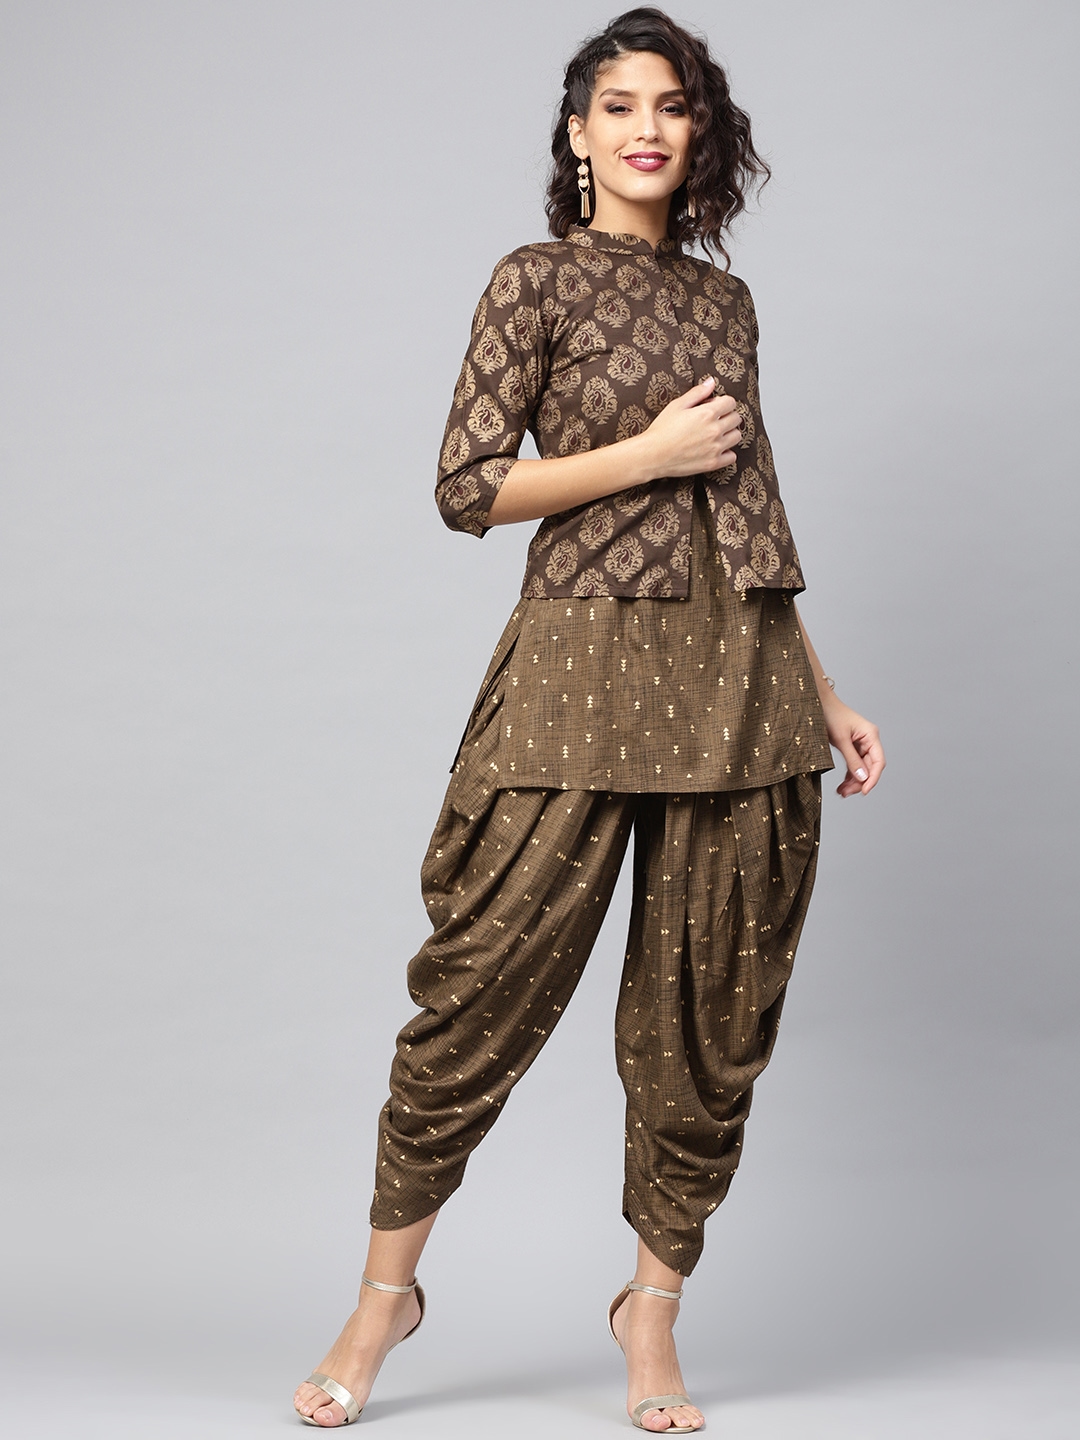 Buy Peach Cotton Dhoti Set with Embroidery Jacket for Girls Online